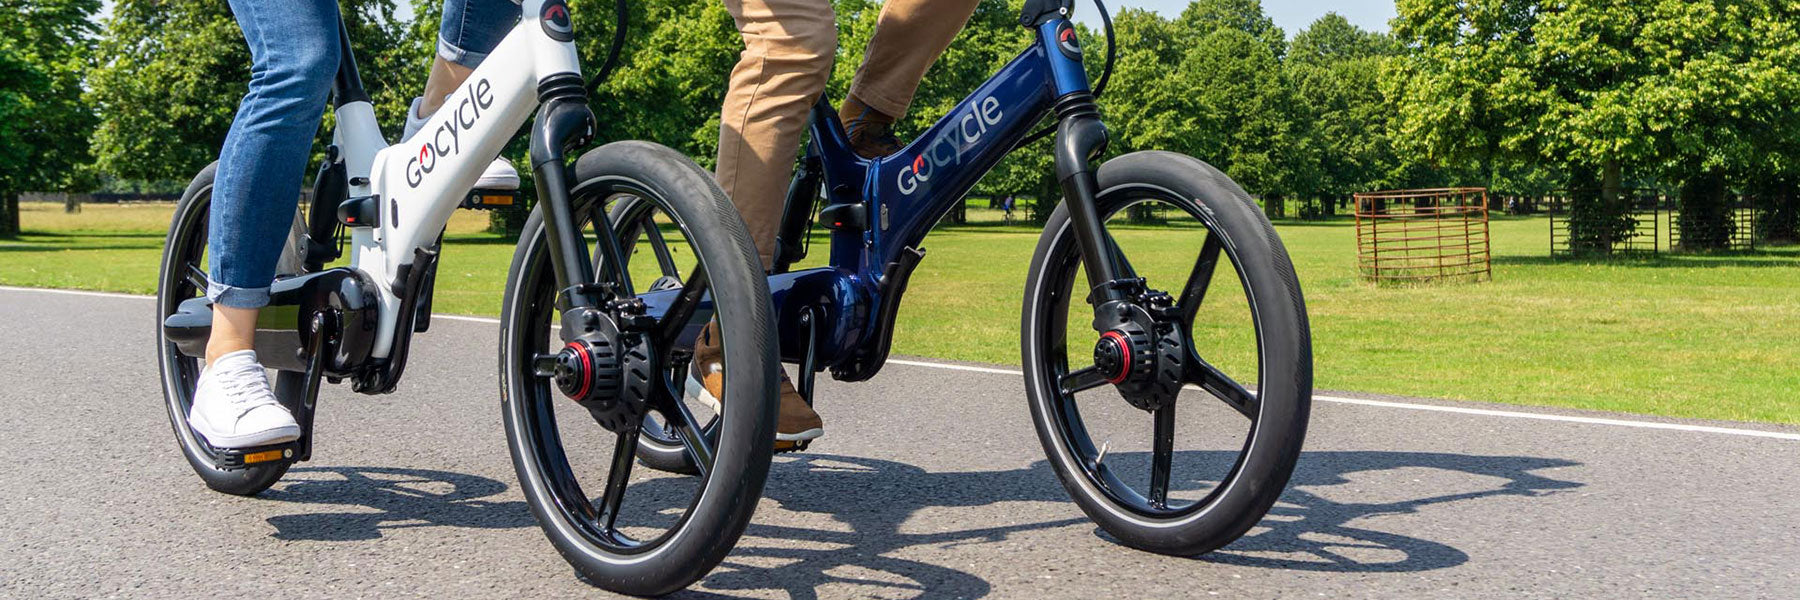 Two people riding Gocycle folding electric bikes